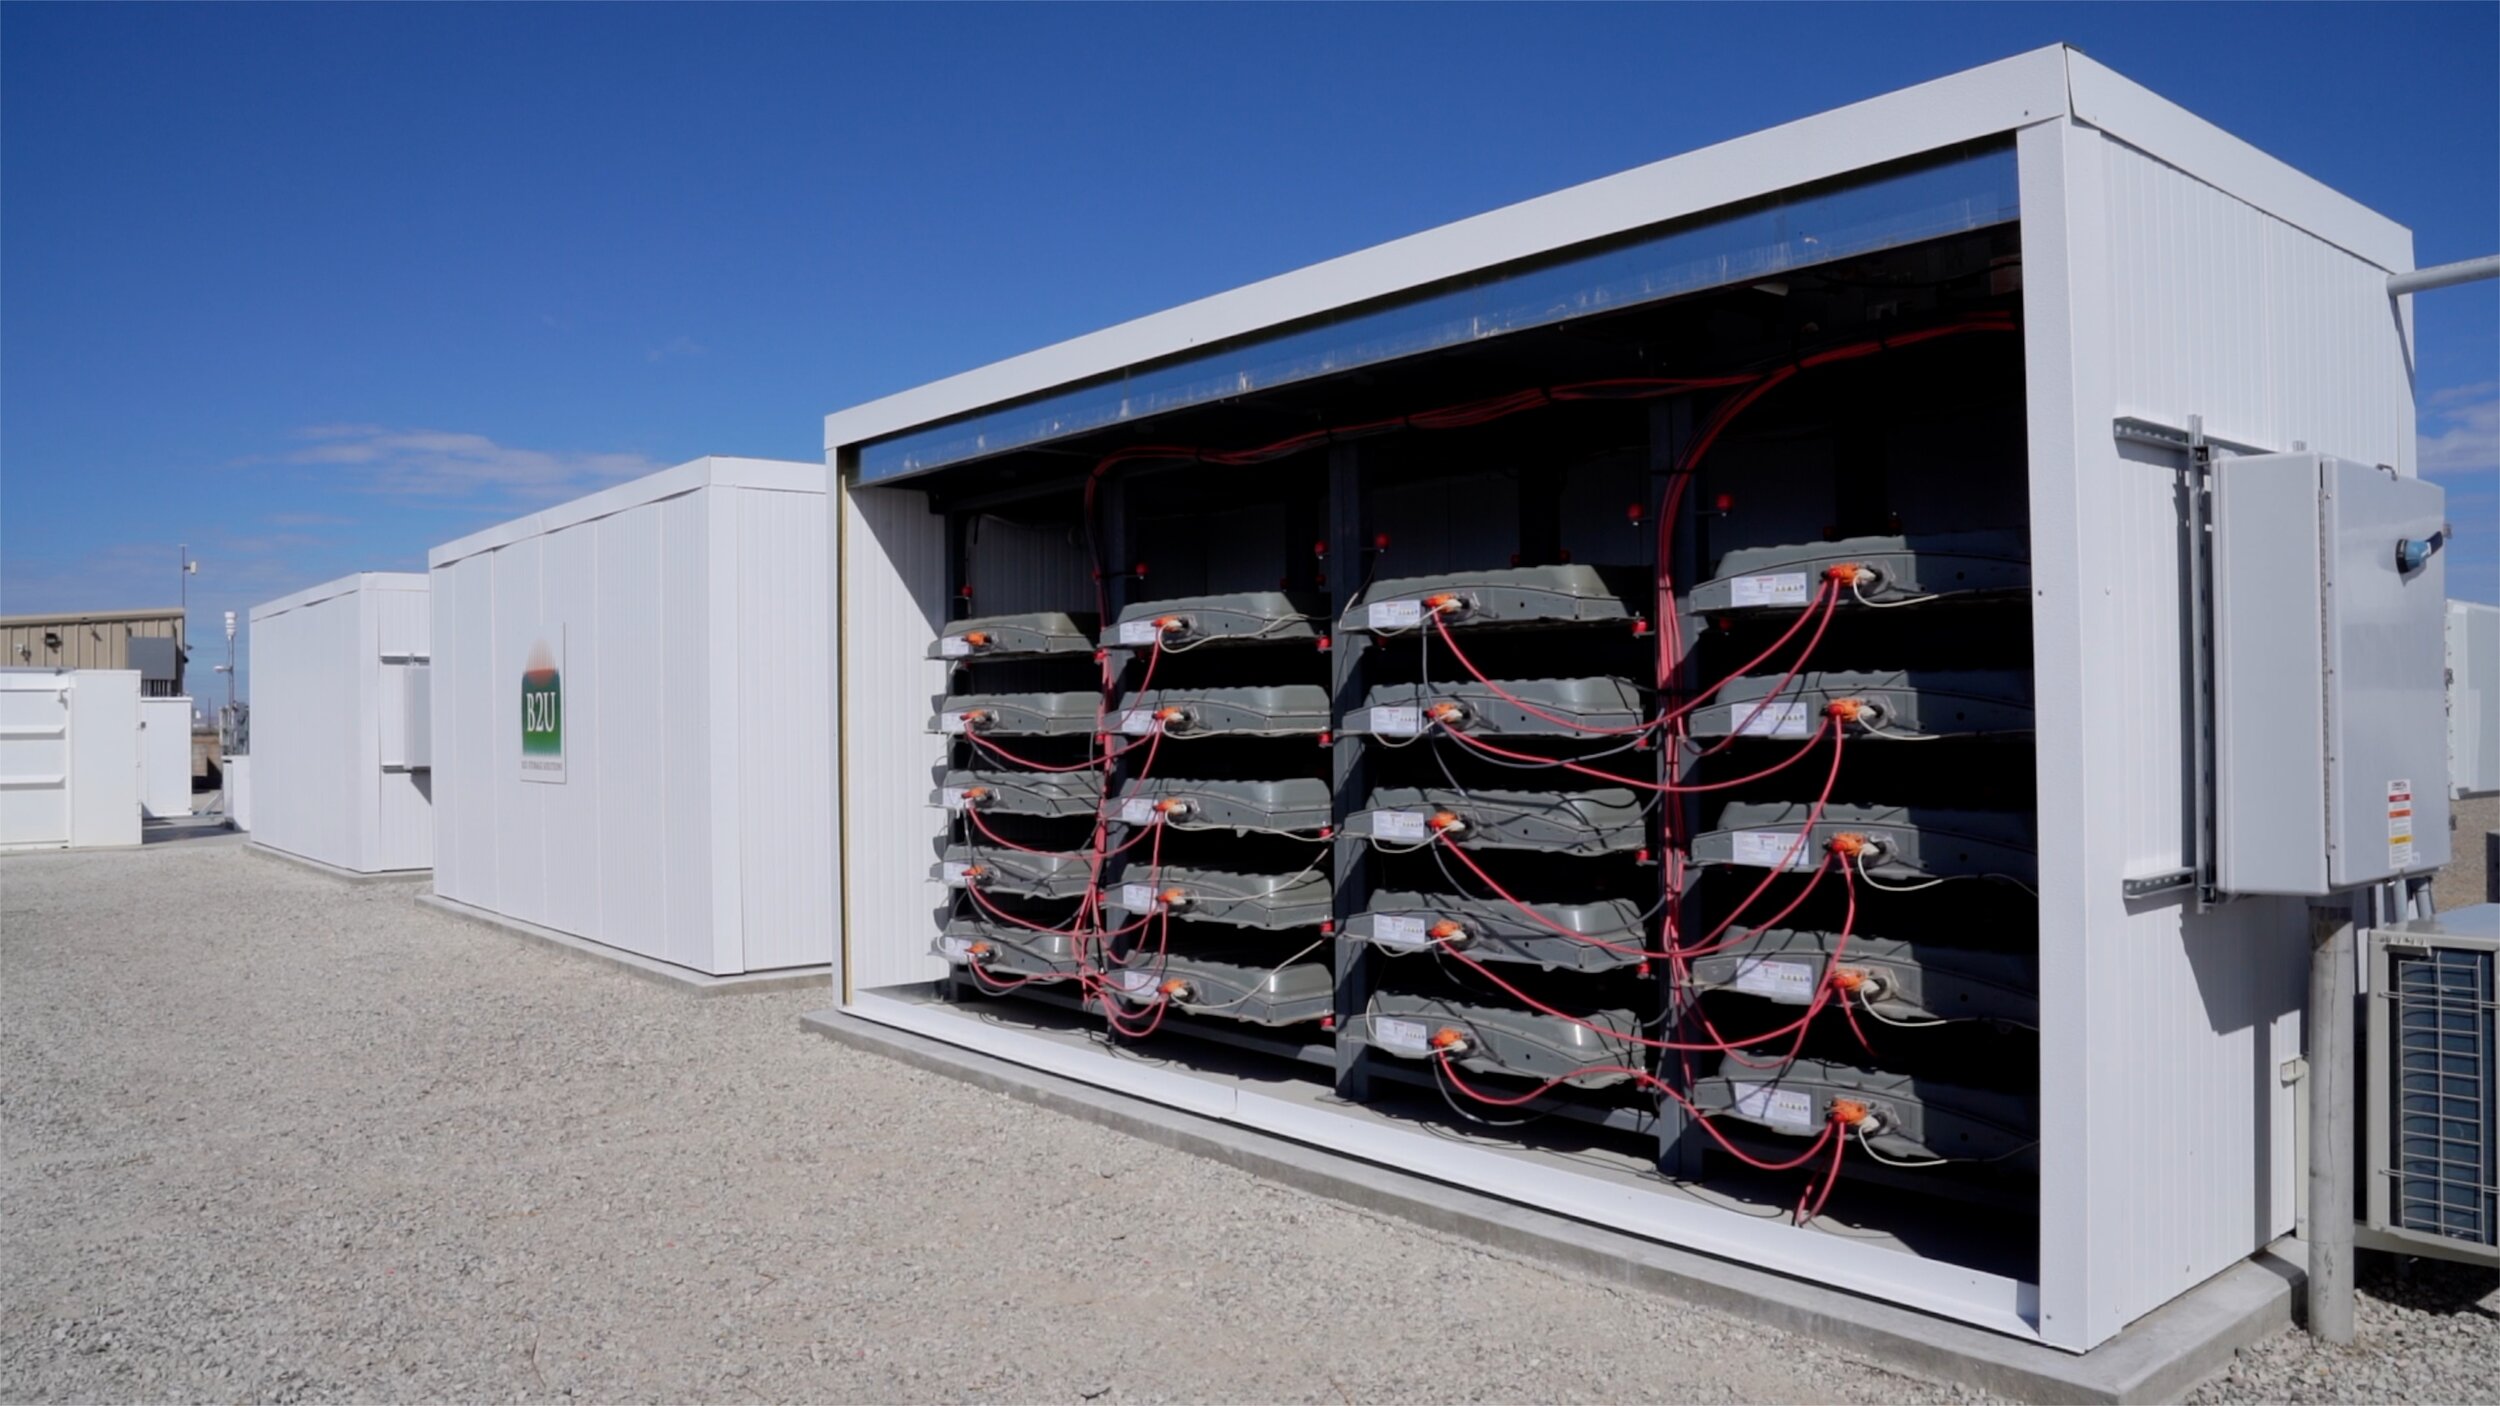 EV batteries are used as grid-scale storage in New Cuyama, California